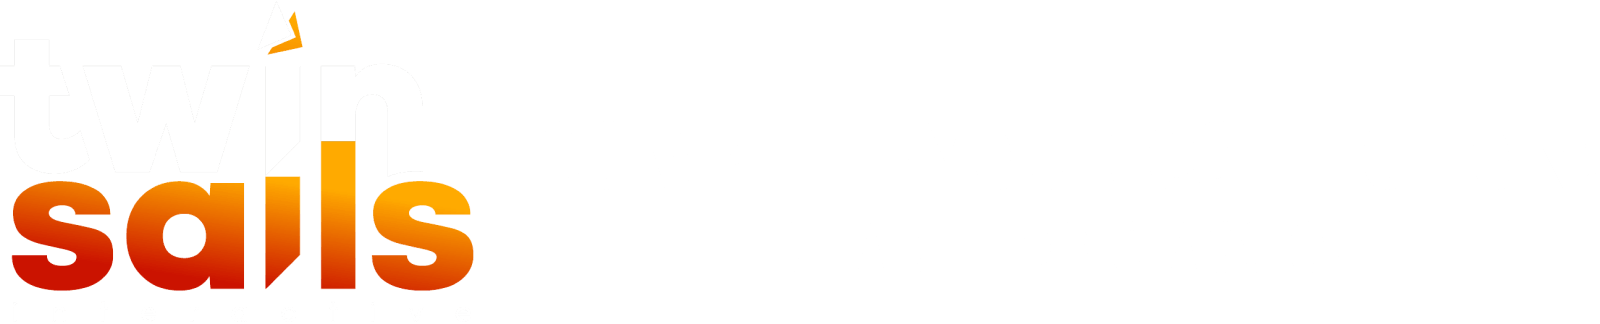 Complete Your Twin Sails Collection: 7 Tabletop Classics